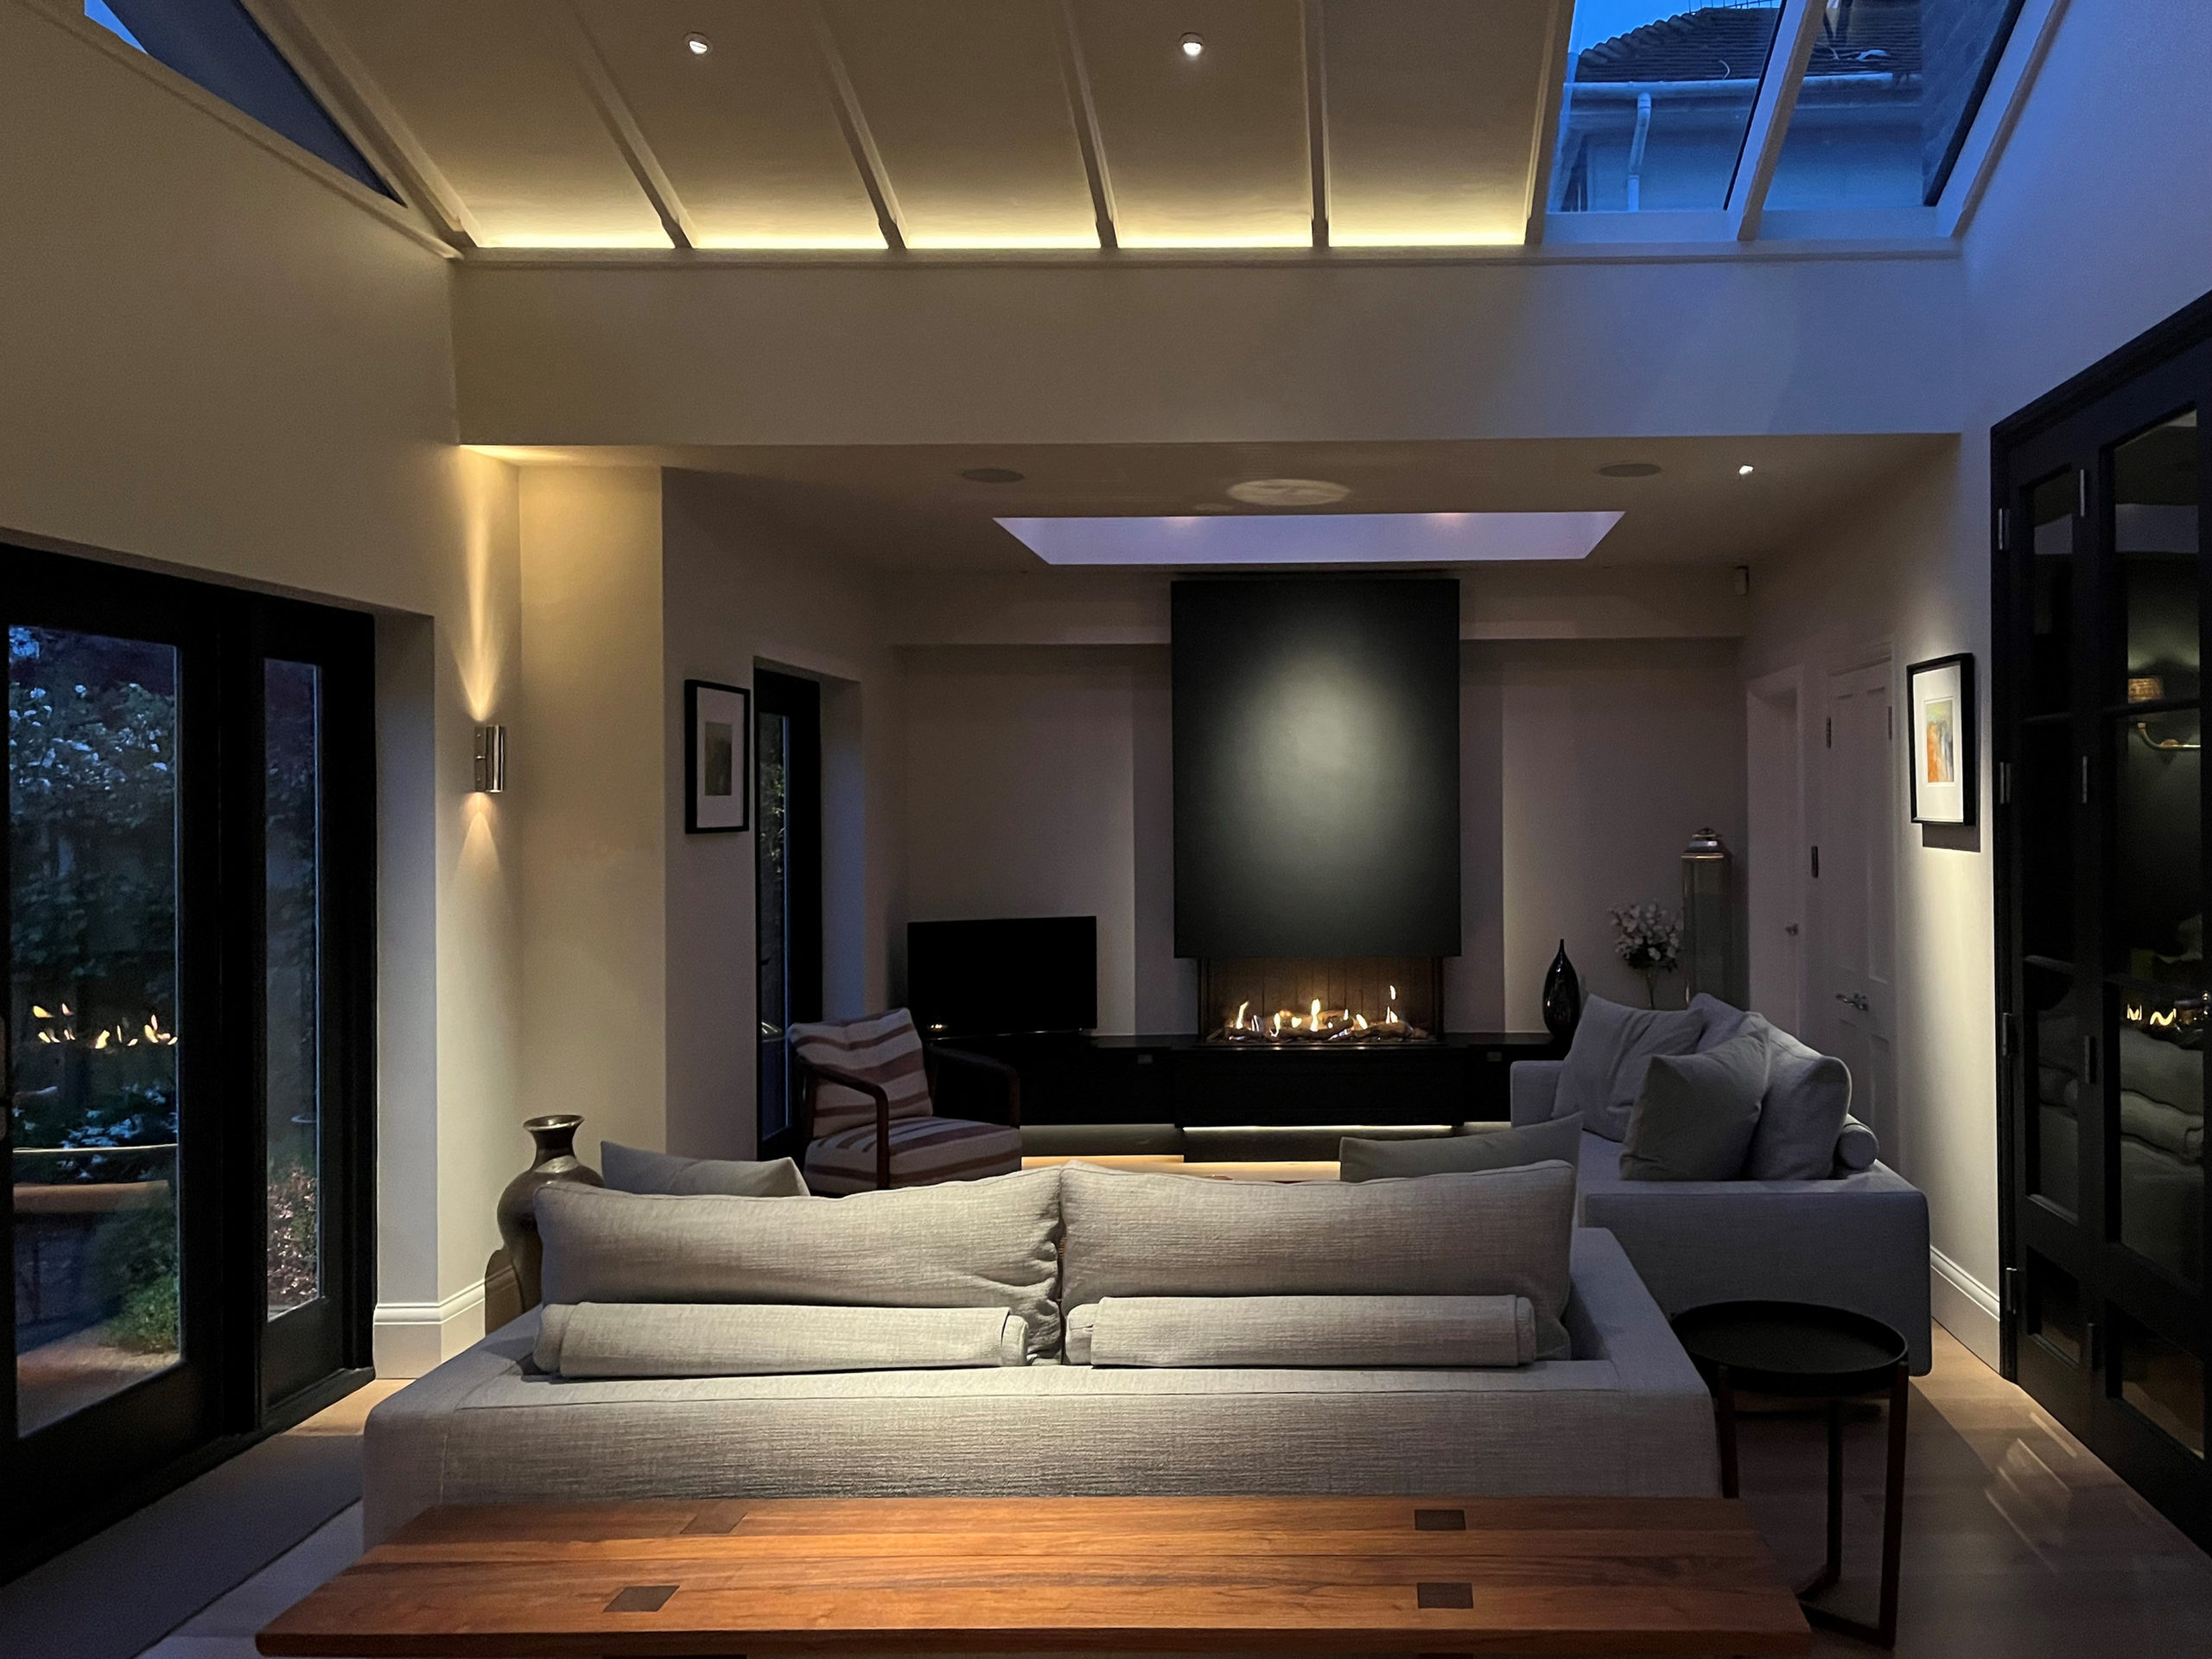 exmpale of upgrade from halogen downlights to LED in open plan living room